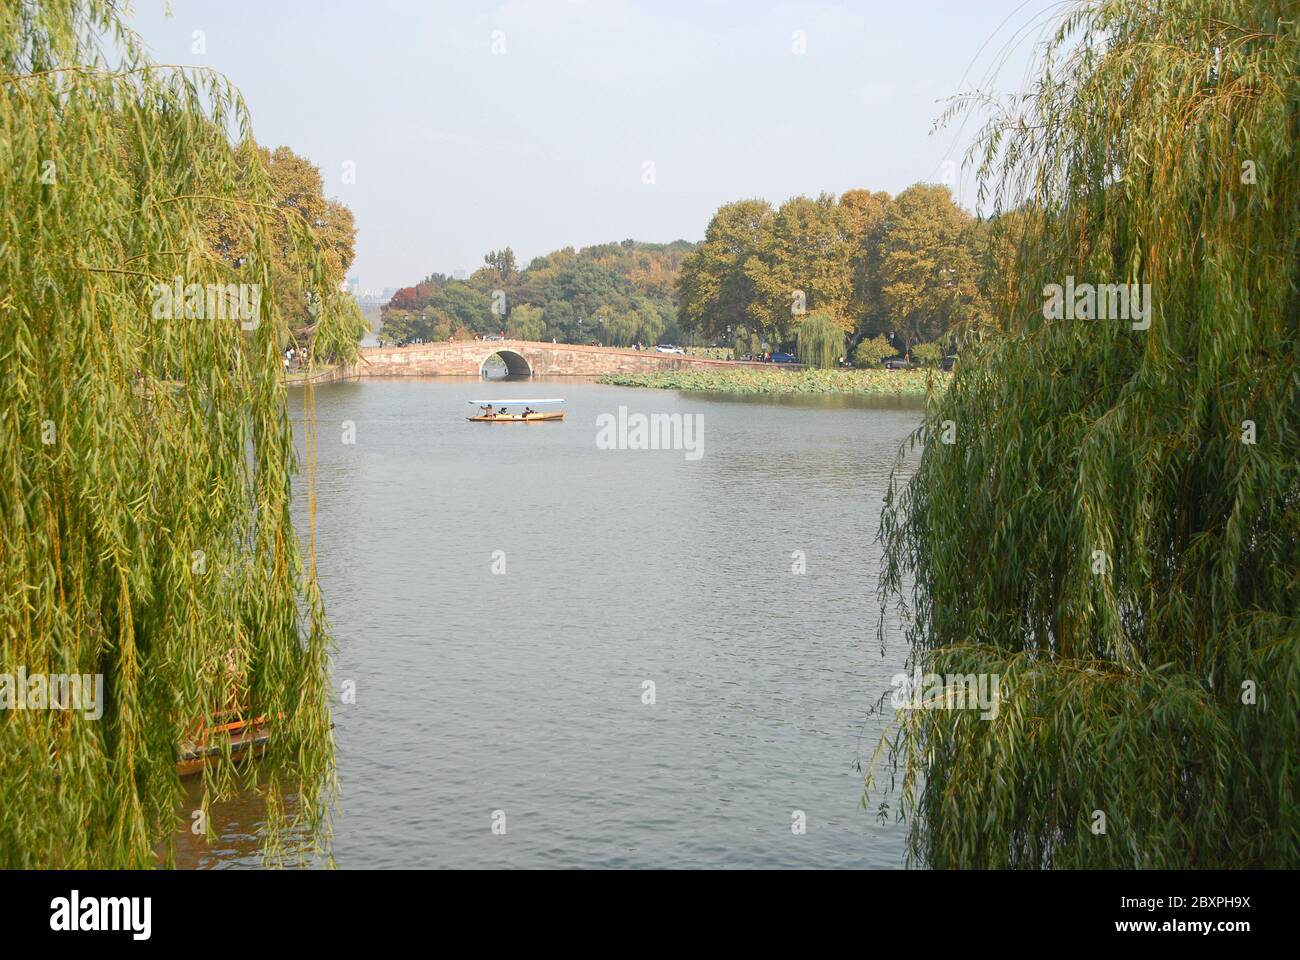 West Lake (Xi Hu) in Hangzhou, Zhejiang Province, China with willow trees. Taking a boat on West Lake, Hangzhou is popular with tourists Stock Photo